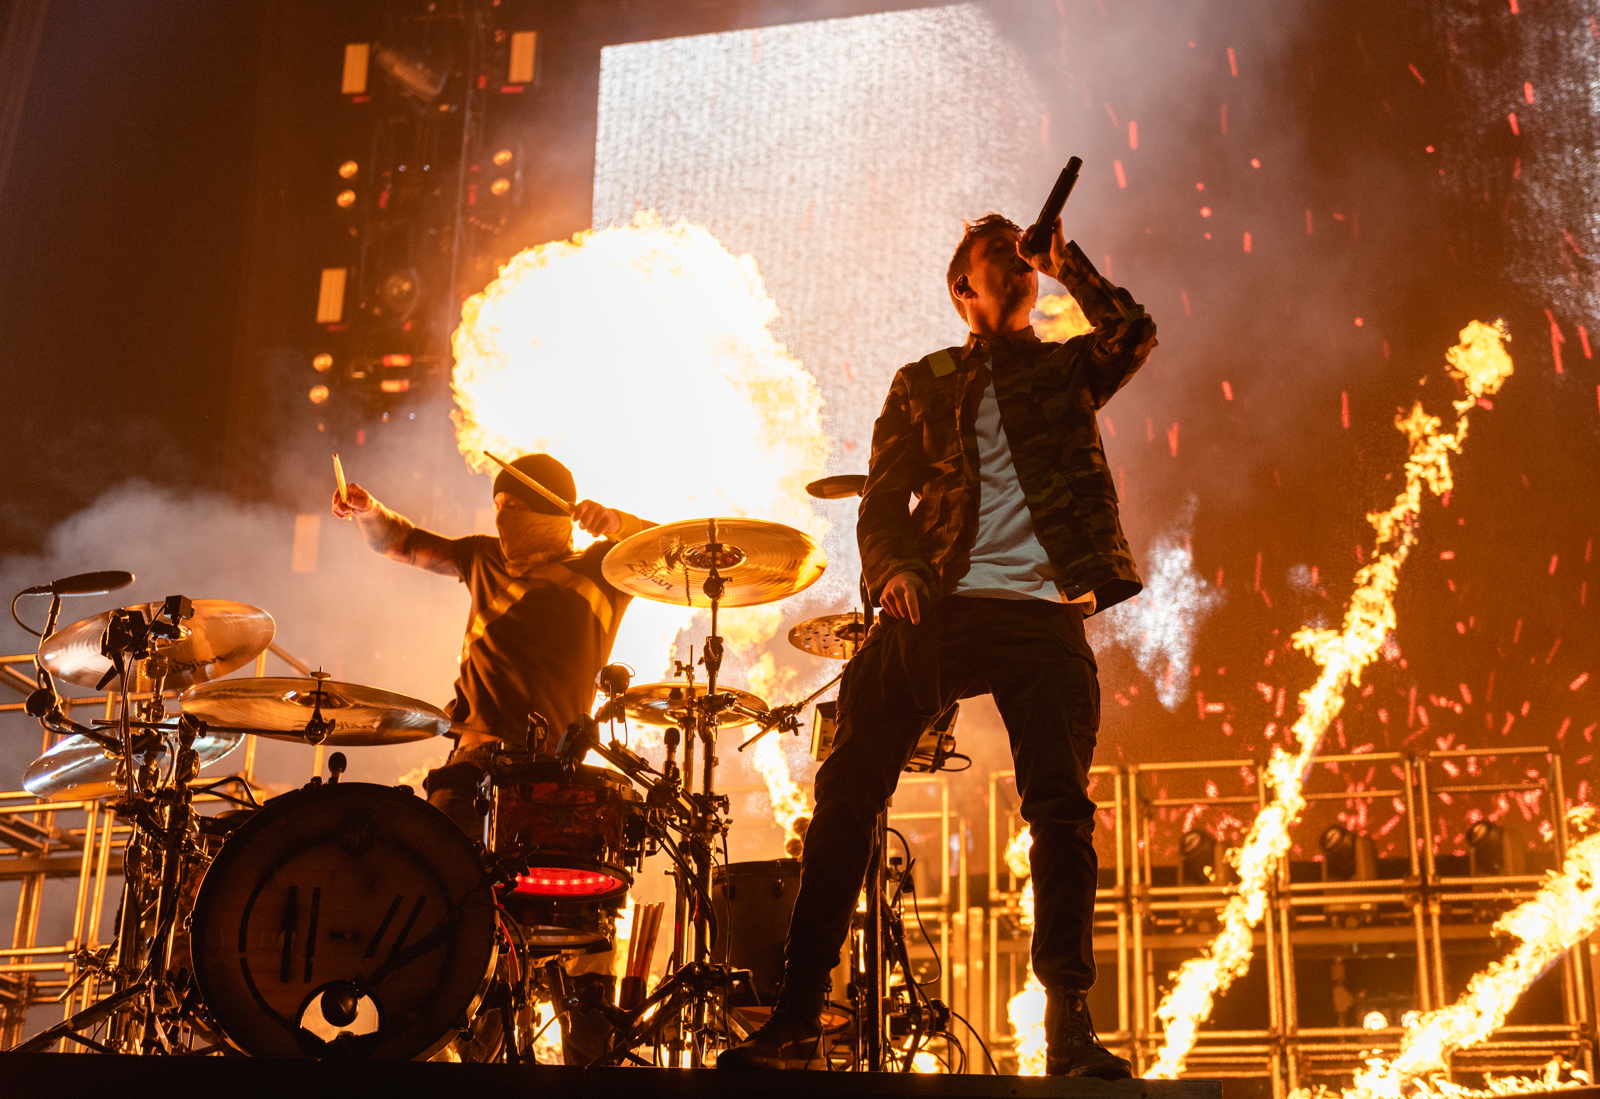 Gallery Twenty One Pilots brings ‘Trench’ to Staples Center Daily Bruin